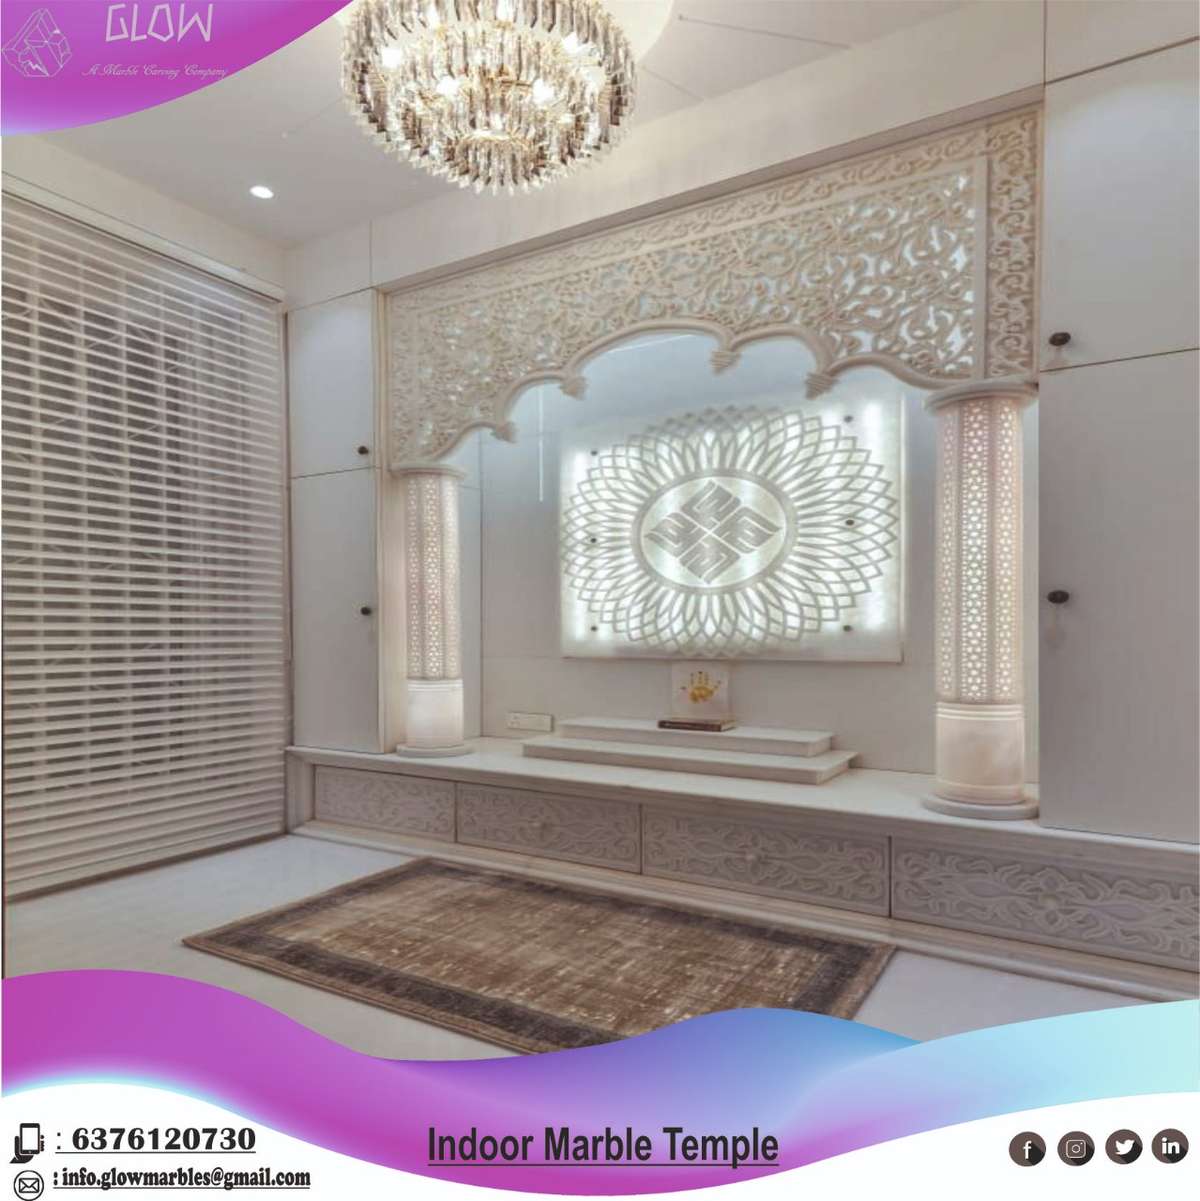 Lighting, Prayer Room, Home Decor Designs by Building Supplies Glow Marble A Marble Carving Company, Jaipur | Kolo